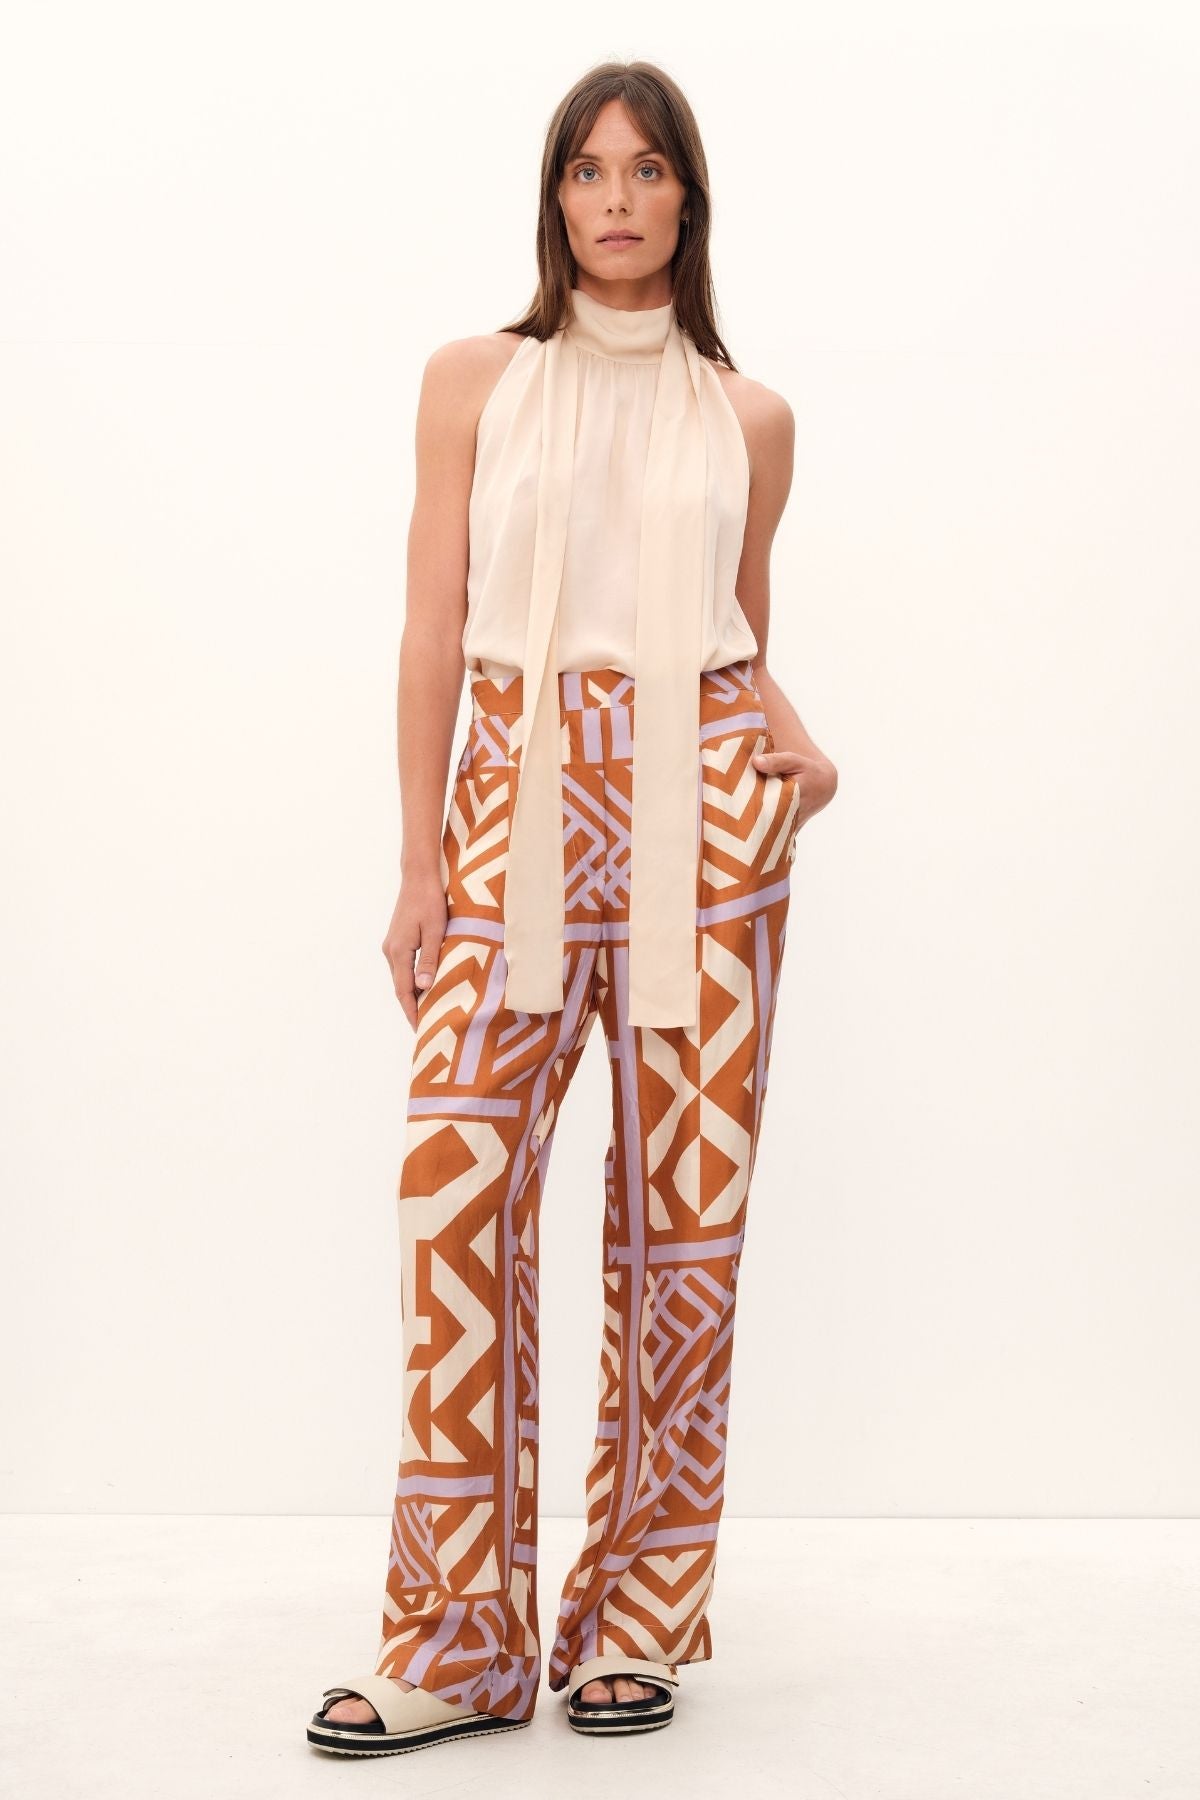 Bold floral print of the House of Mirrors Pant in fresh shades of cream, lilac, and tan. These pants by GINGER & SMART offer a flattering fit with a straight leg, fitted front waistband, and tucks. Made from luxurious silk twill.